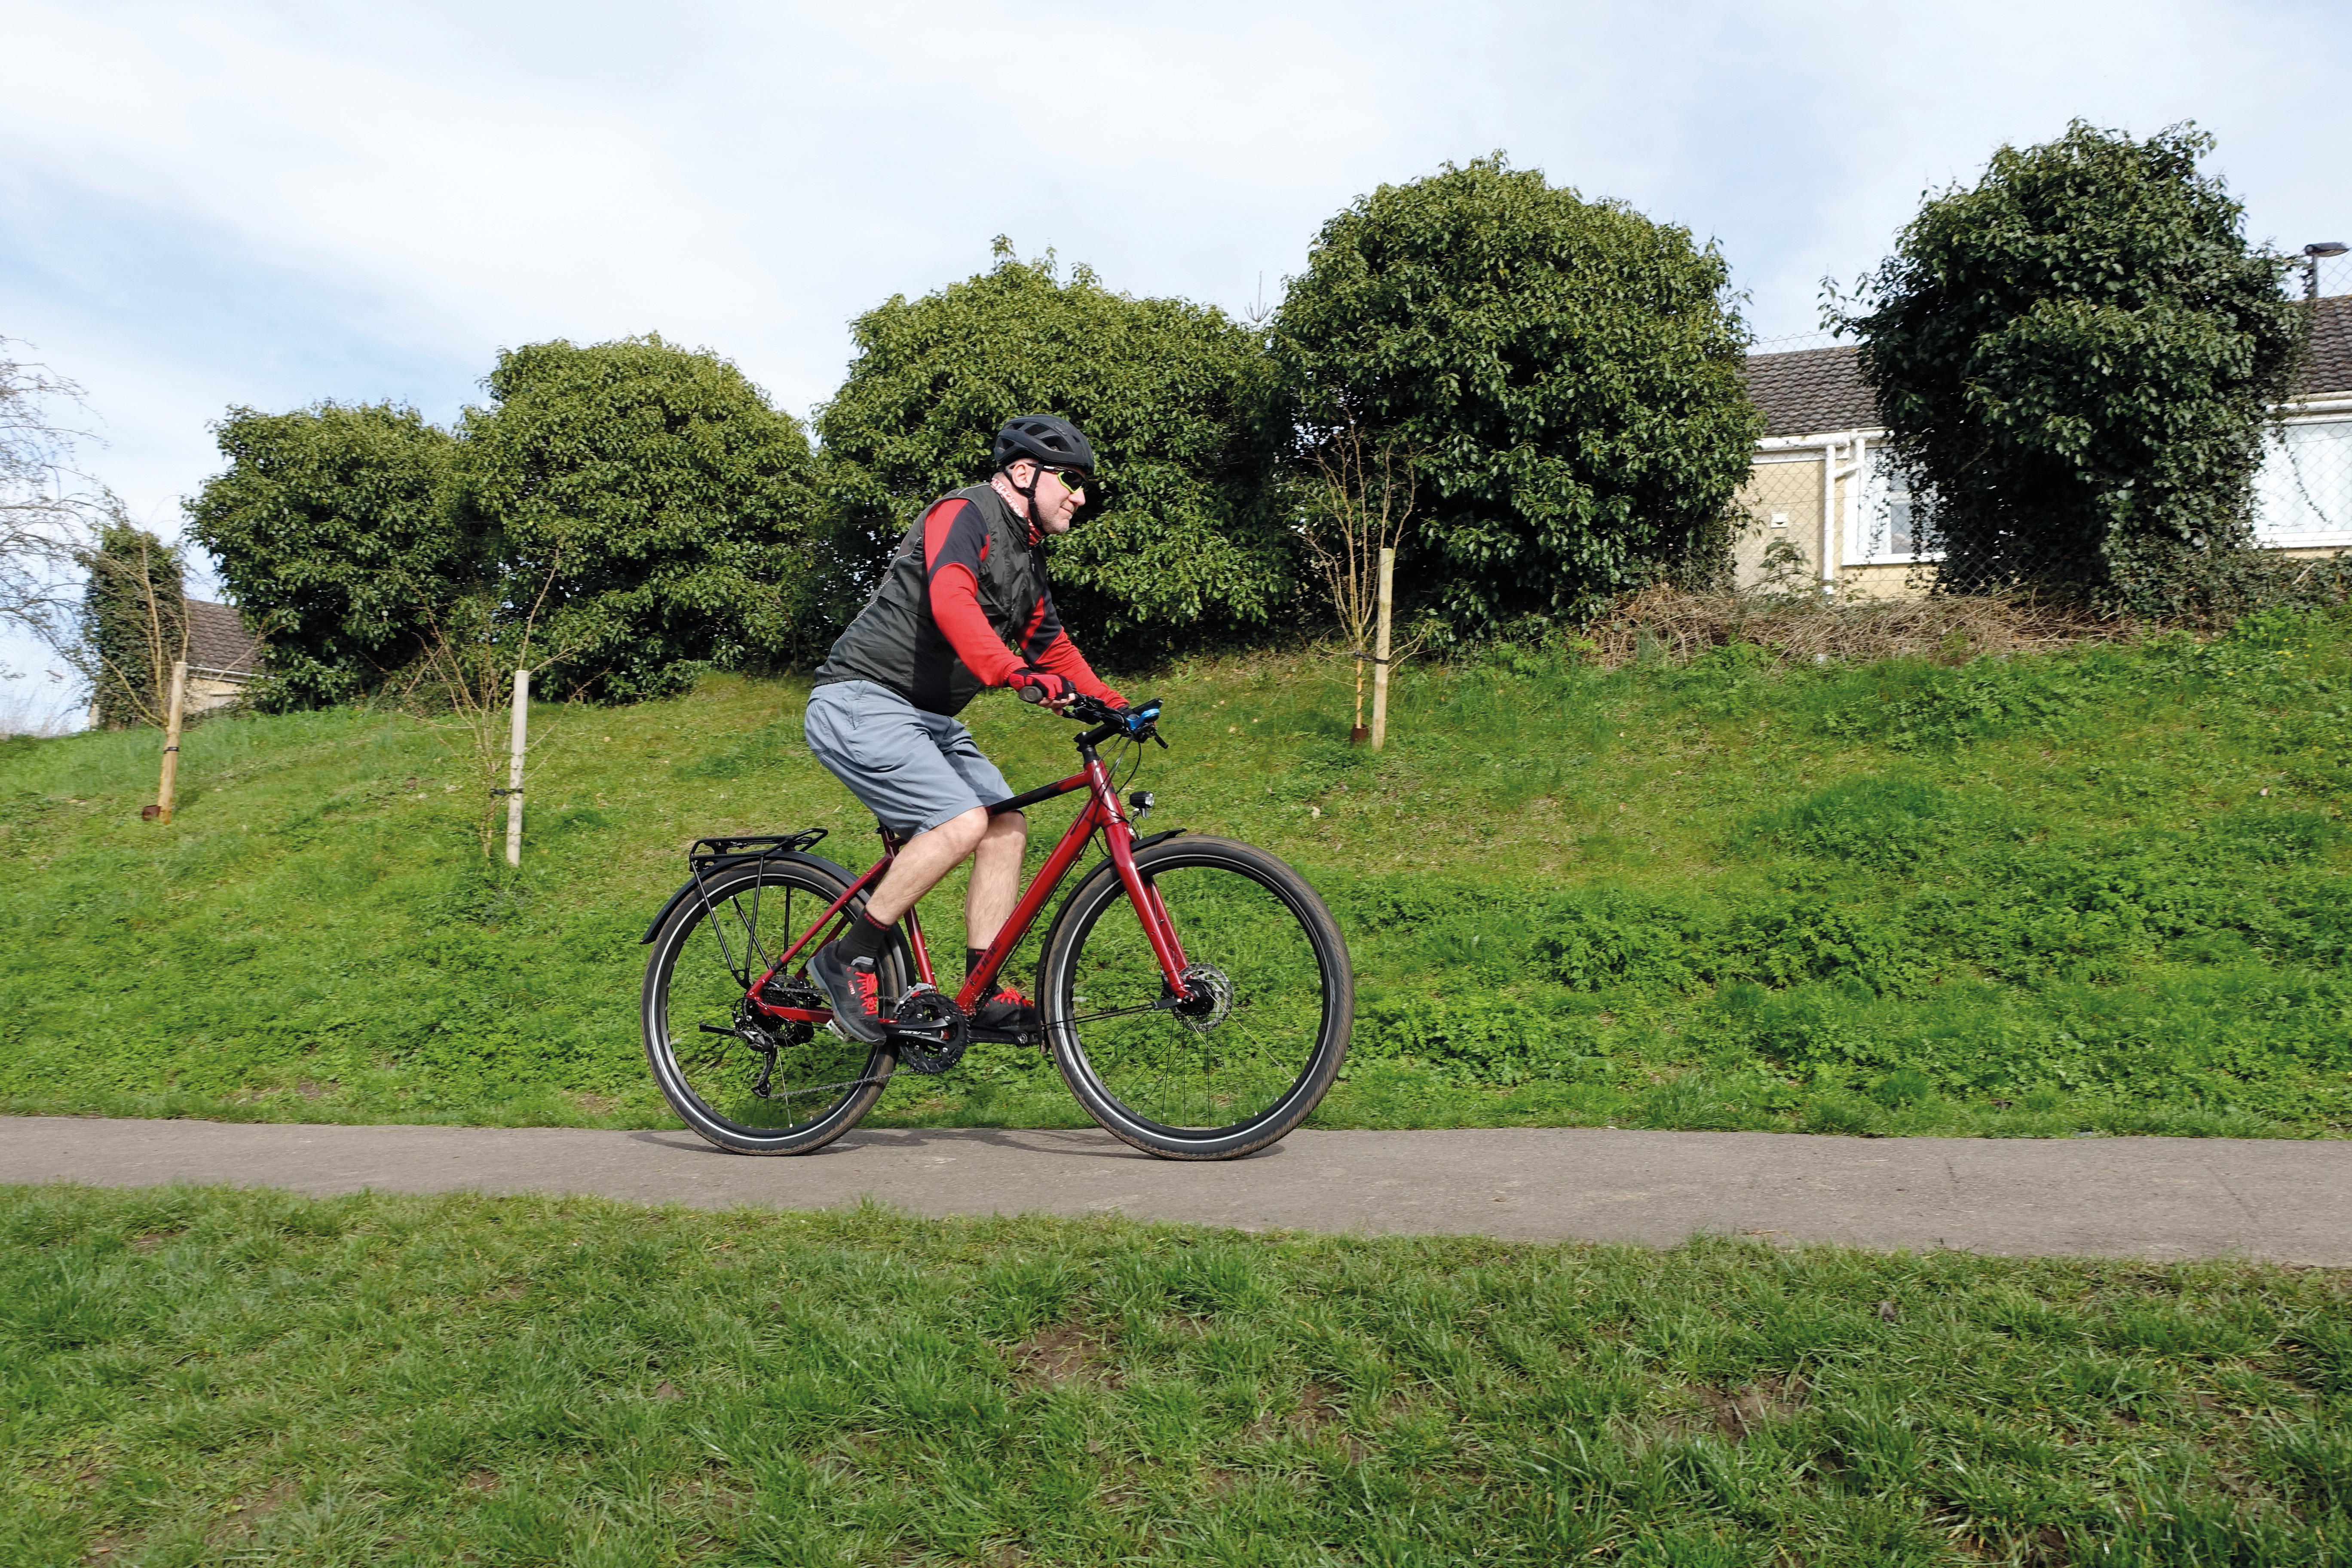 A man cycles along a cycle path on a red bicycle